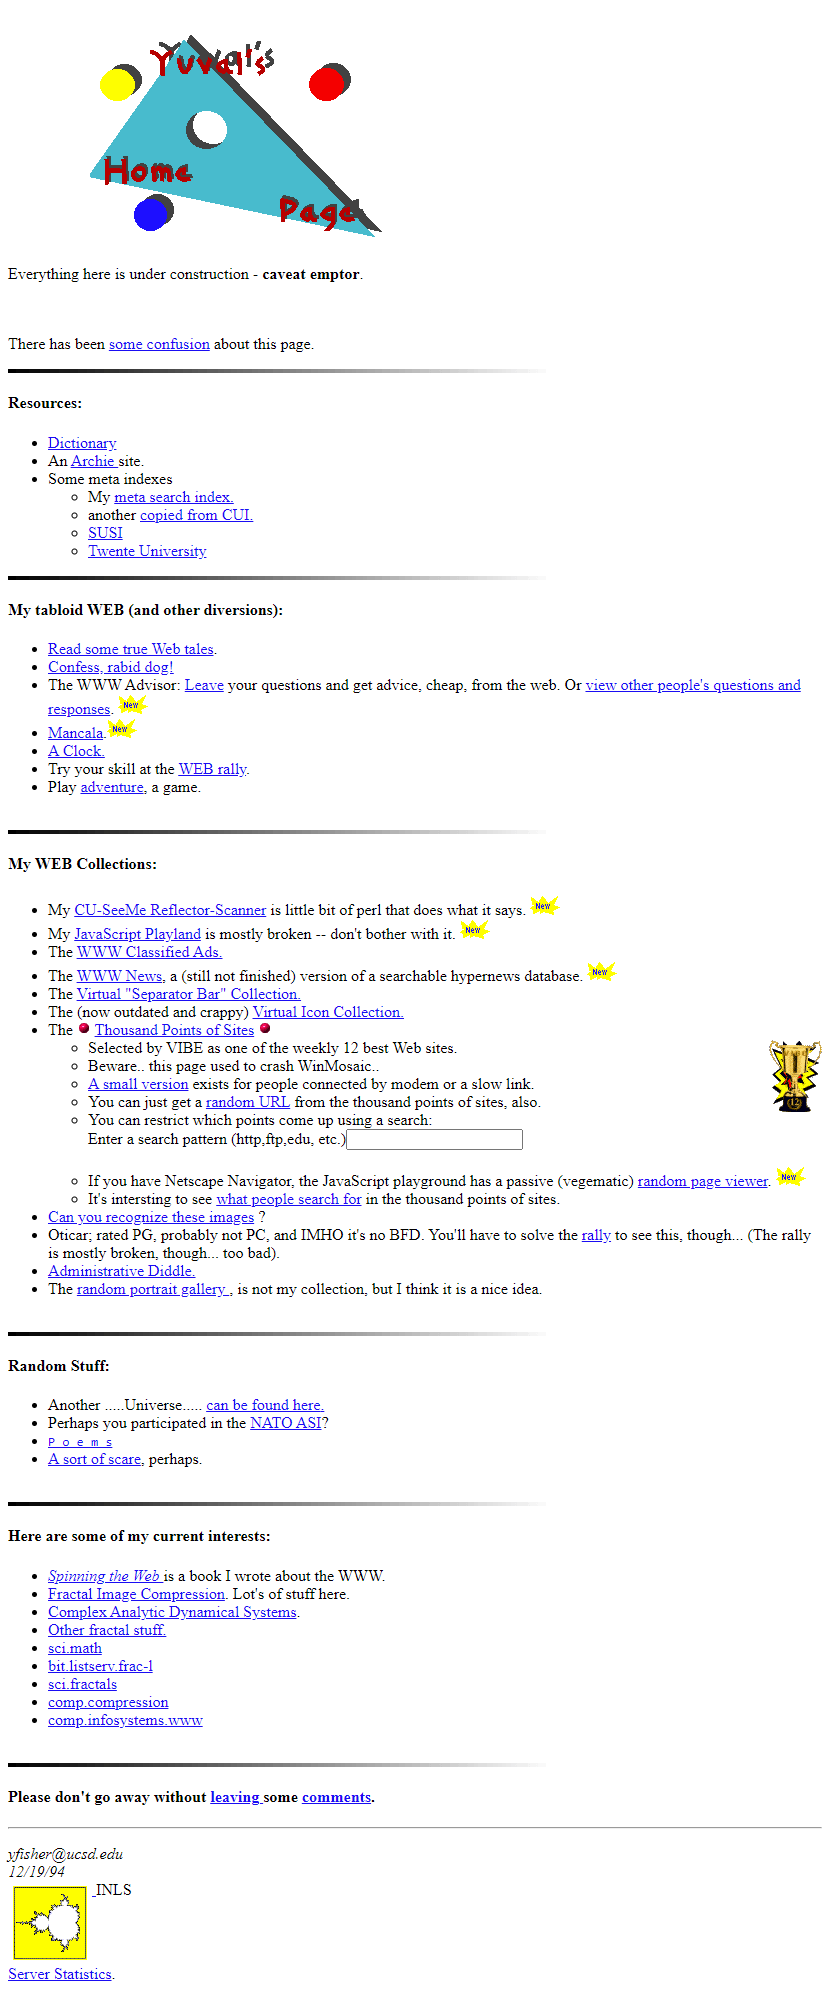 Yuval Fisher’s Home Page in 1994